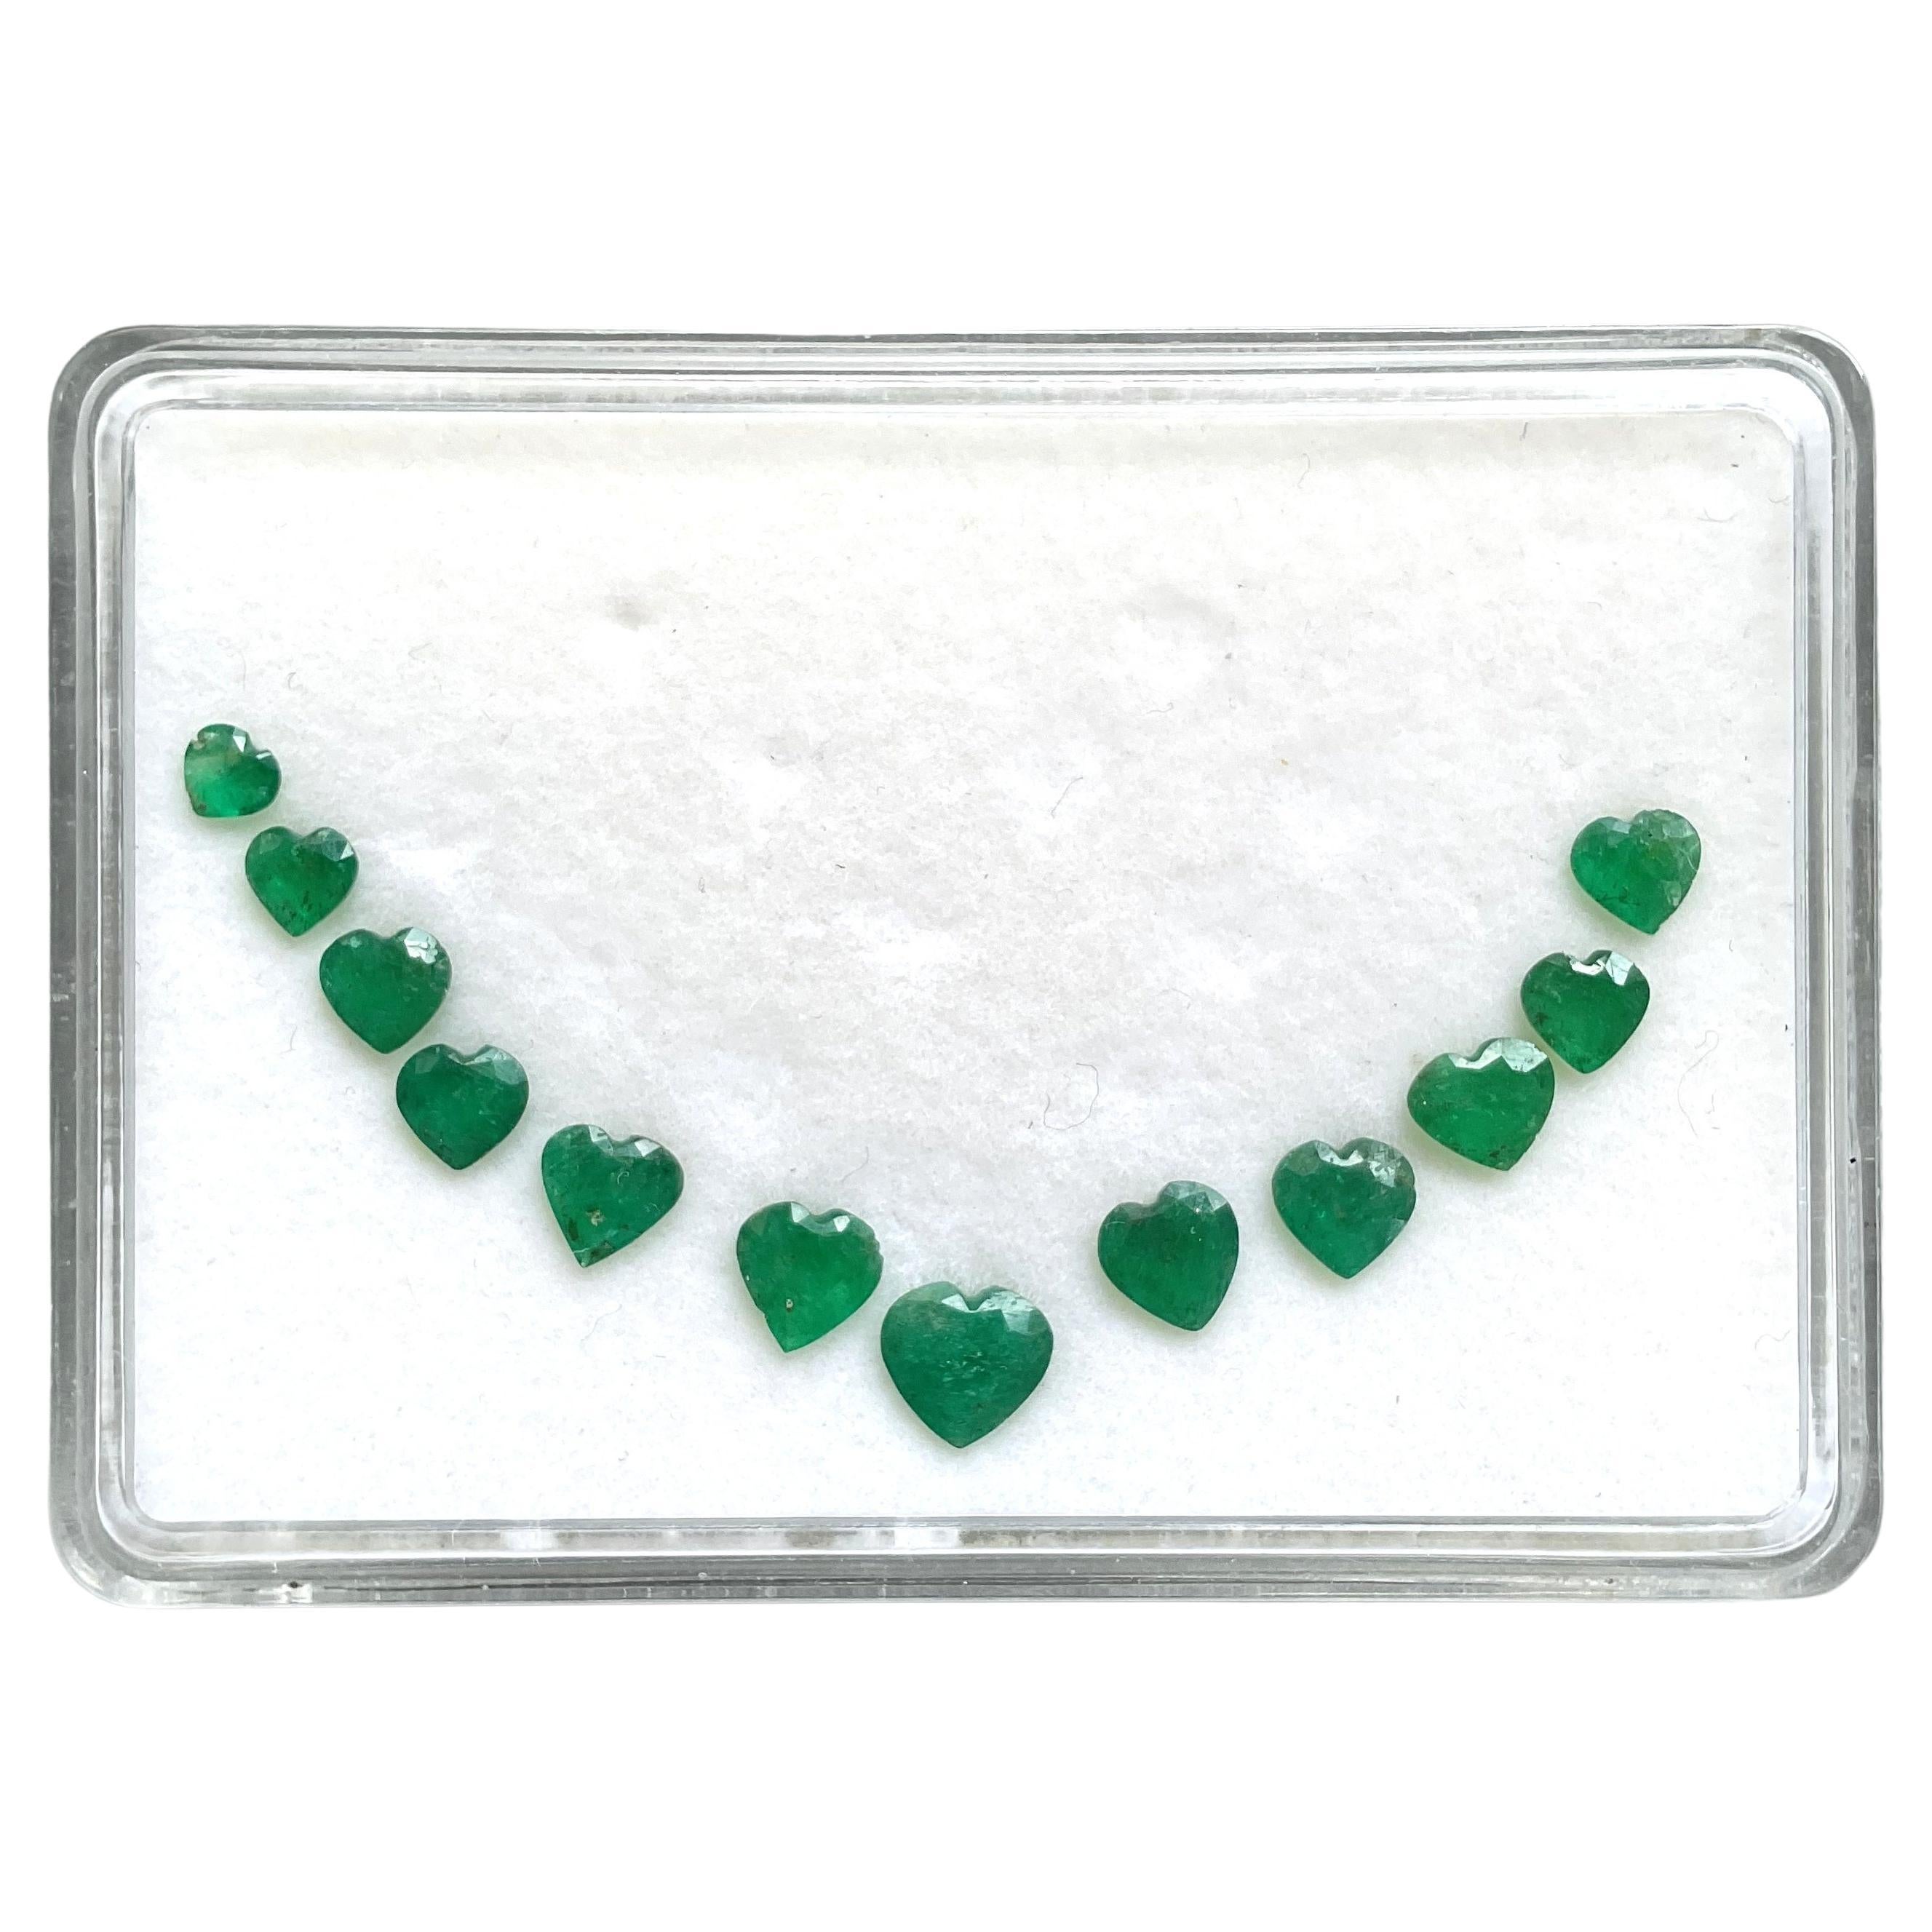 Colombian Emerald Heart Layout 7.65 Carats Cutstone For Jewellery Natural Gems For Sale